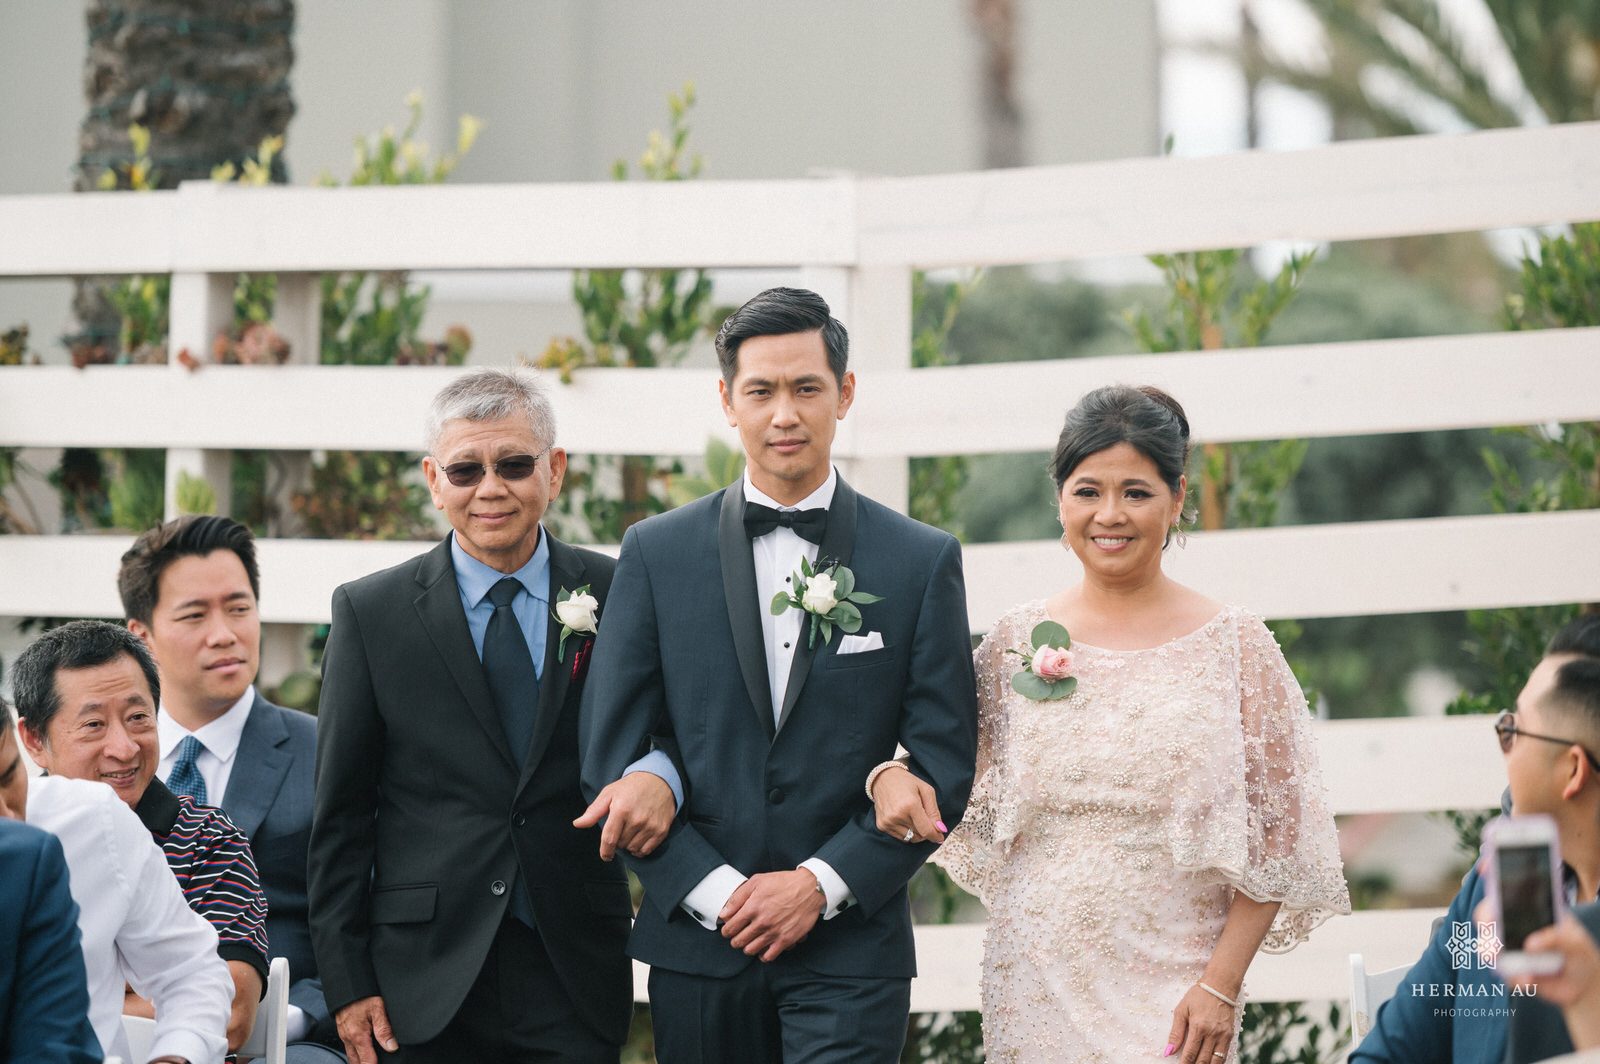 The groom being walked down the aisle by his parents